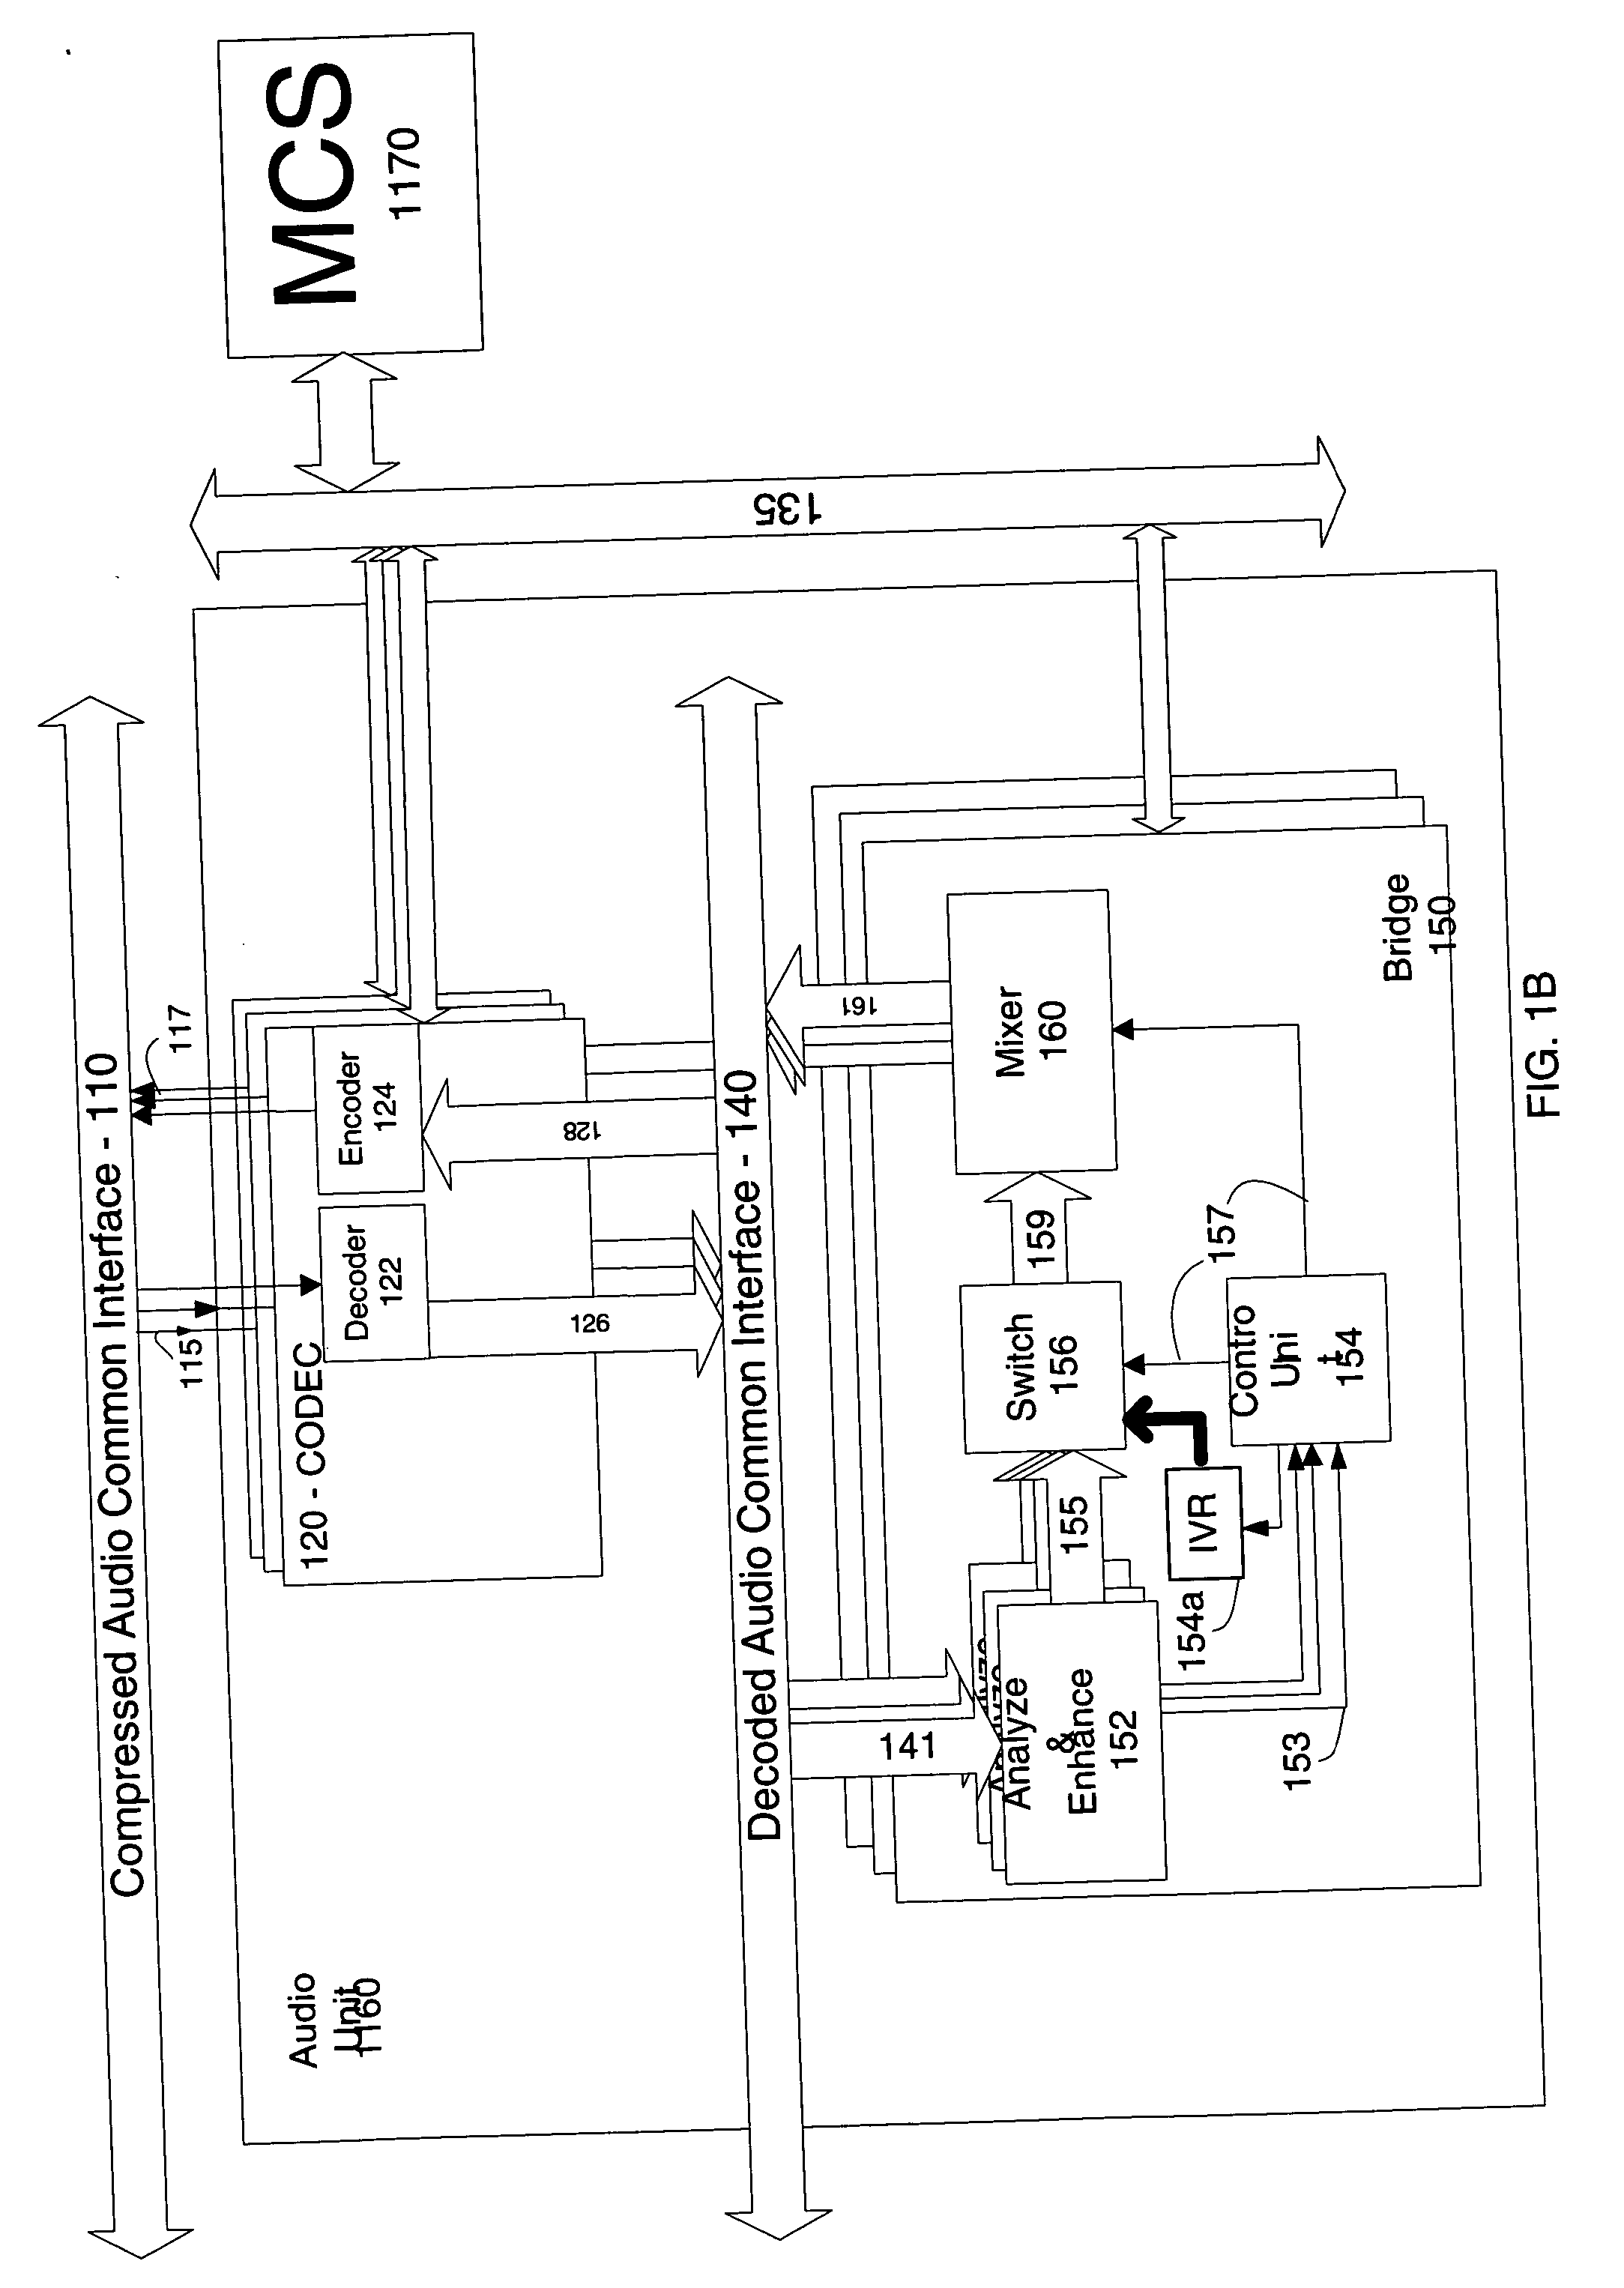 Method and apparatus for improving nuisance signals in audio/video conference